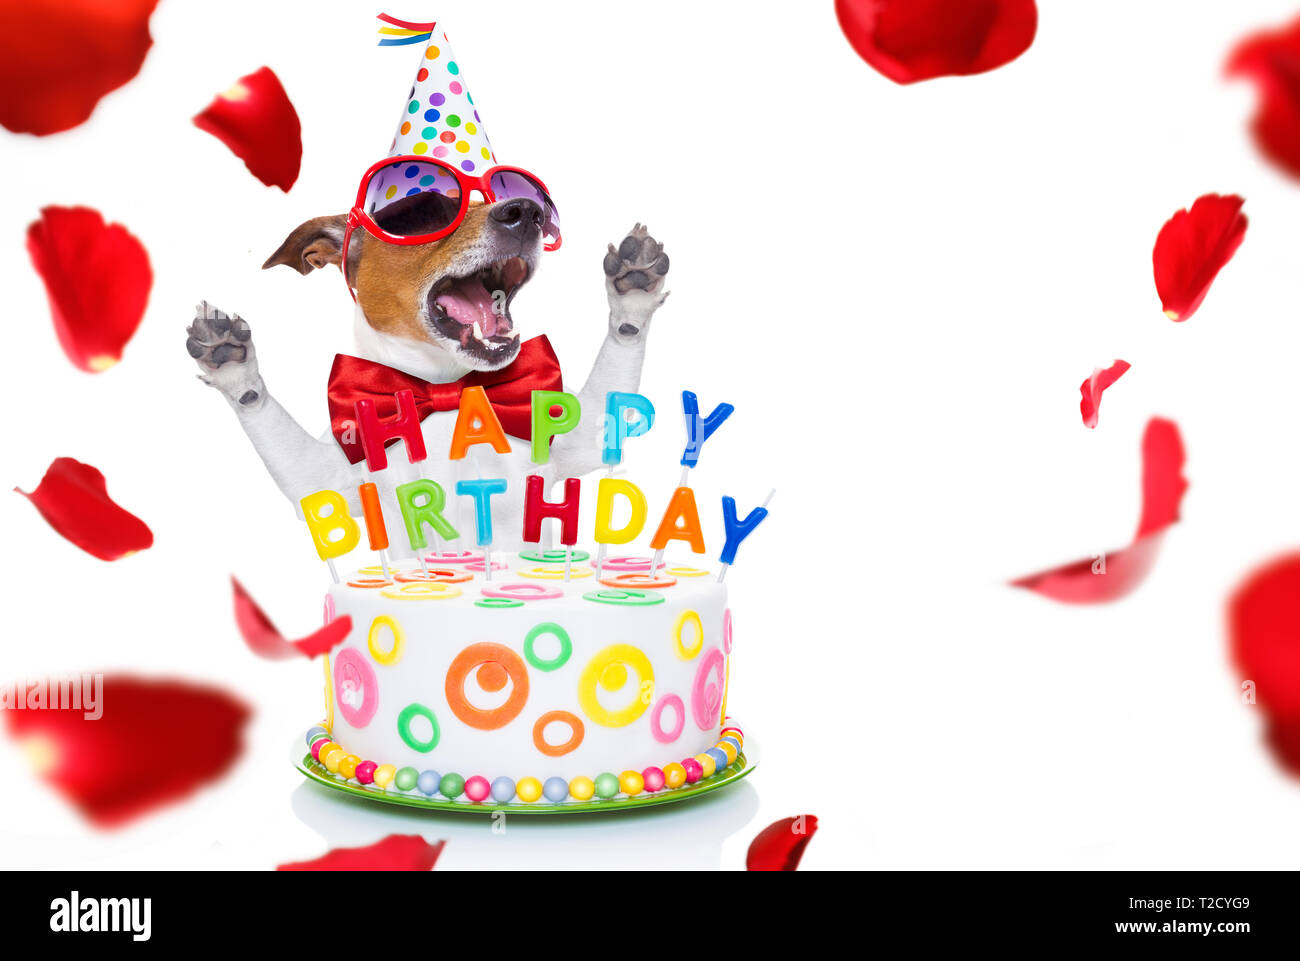 Jack Russell Dog As A Surprise Singing Birthday Song Like Karaoke With Microphone Behind Funny Cake Wearing Red Tie And Party Hat Isolated O Stock Photo Alamy